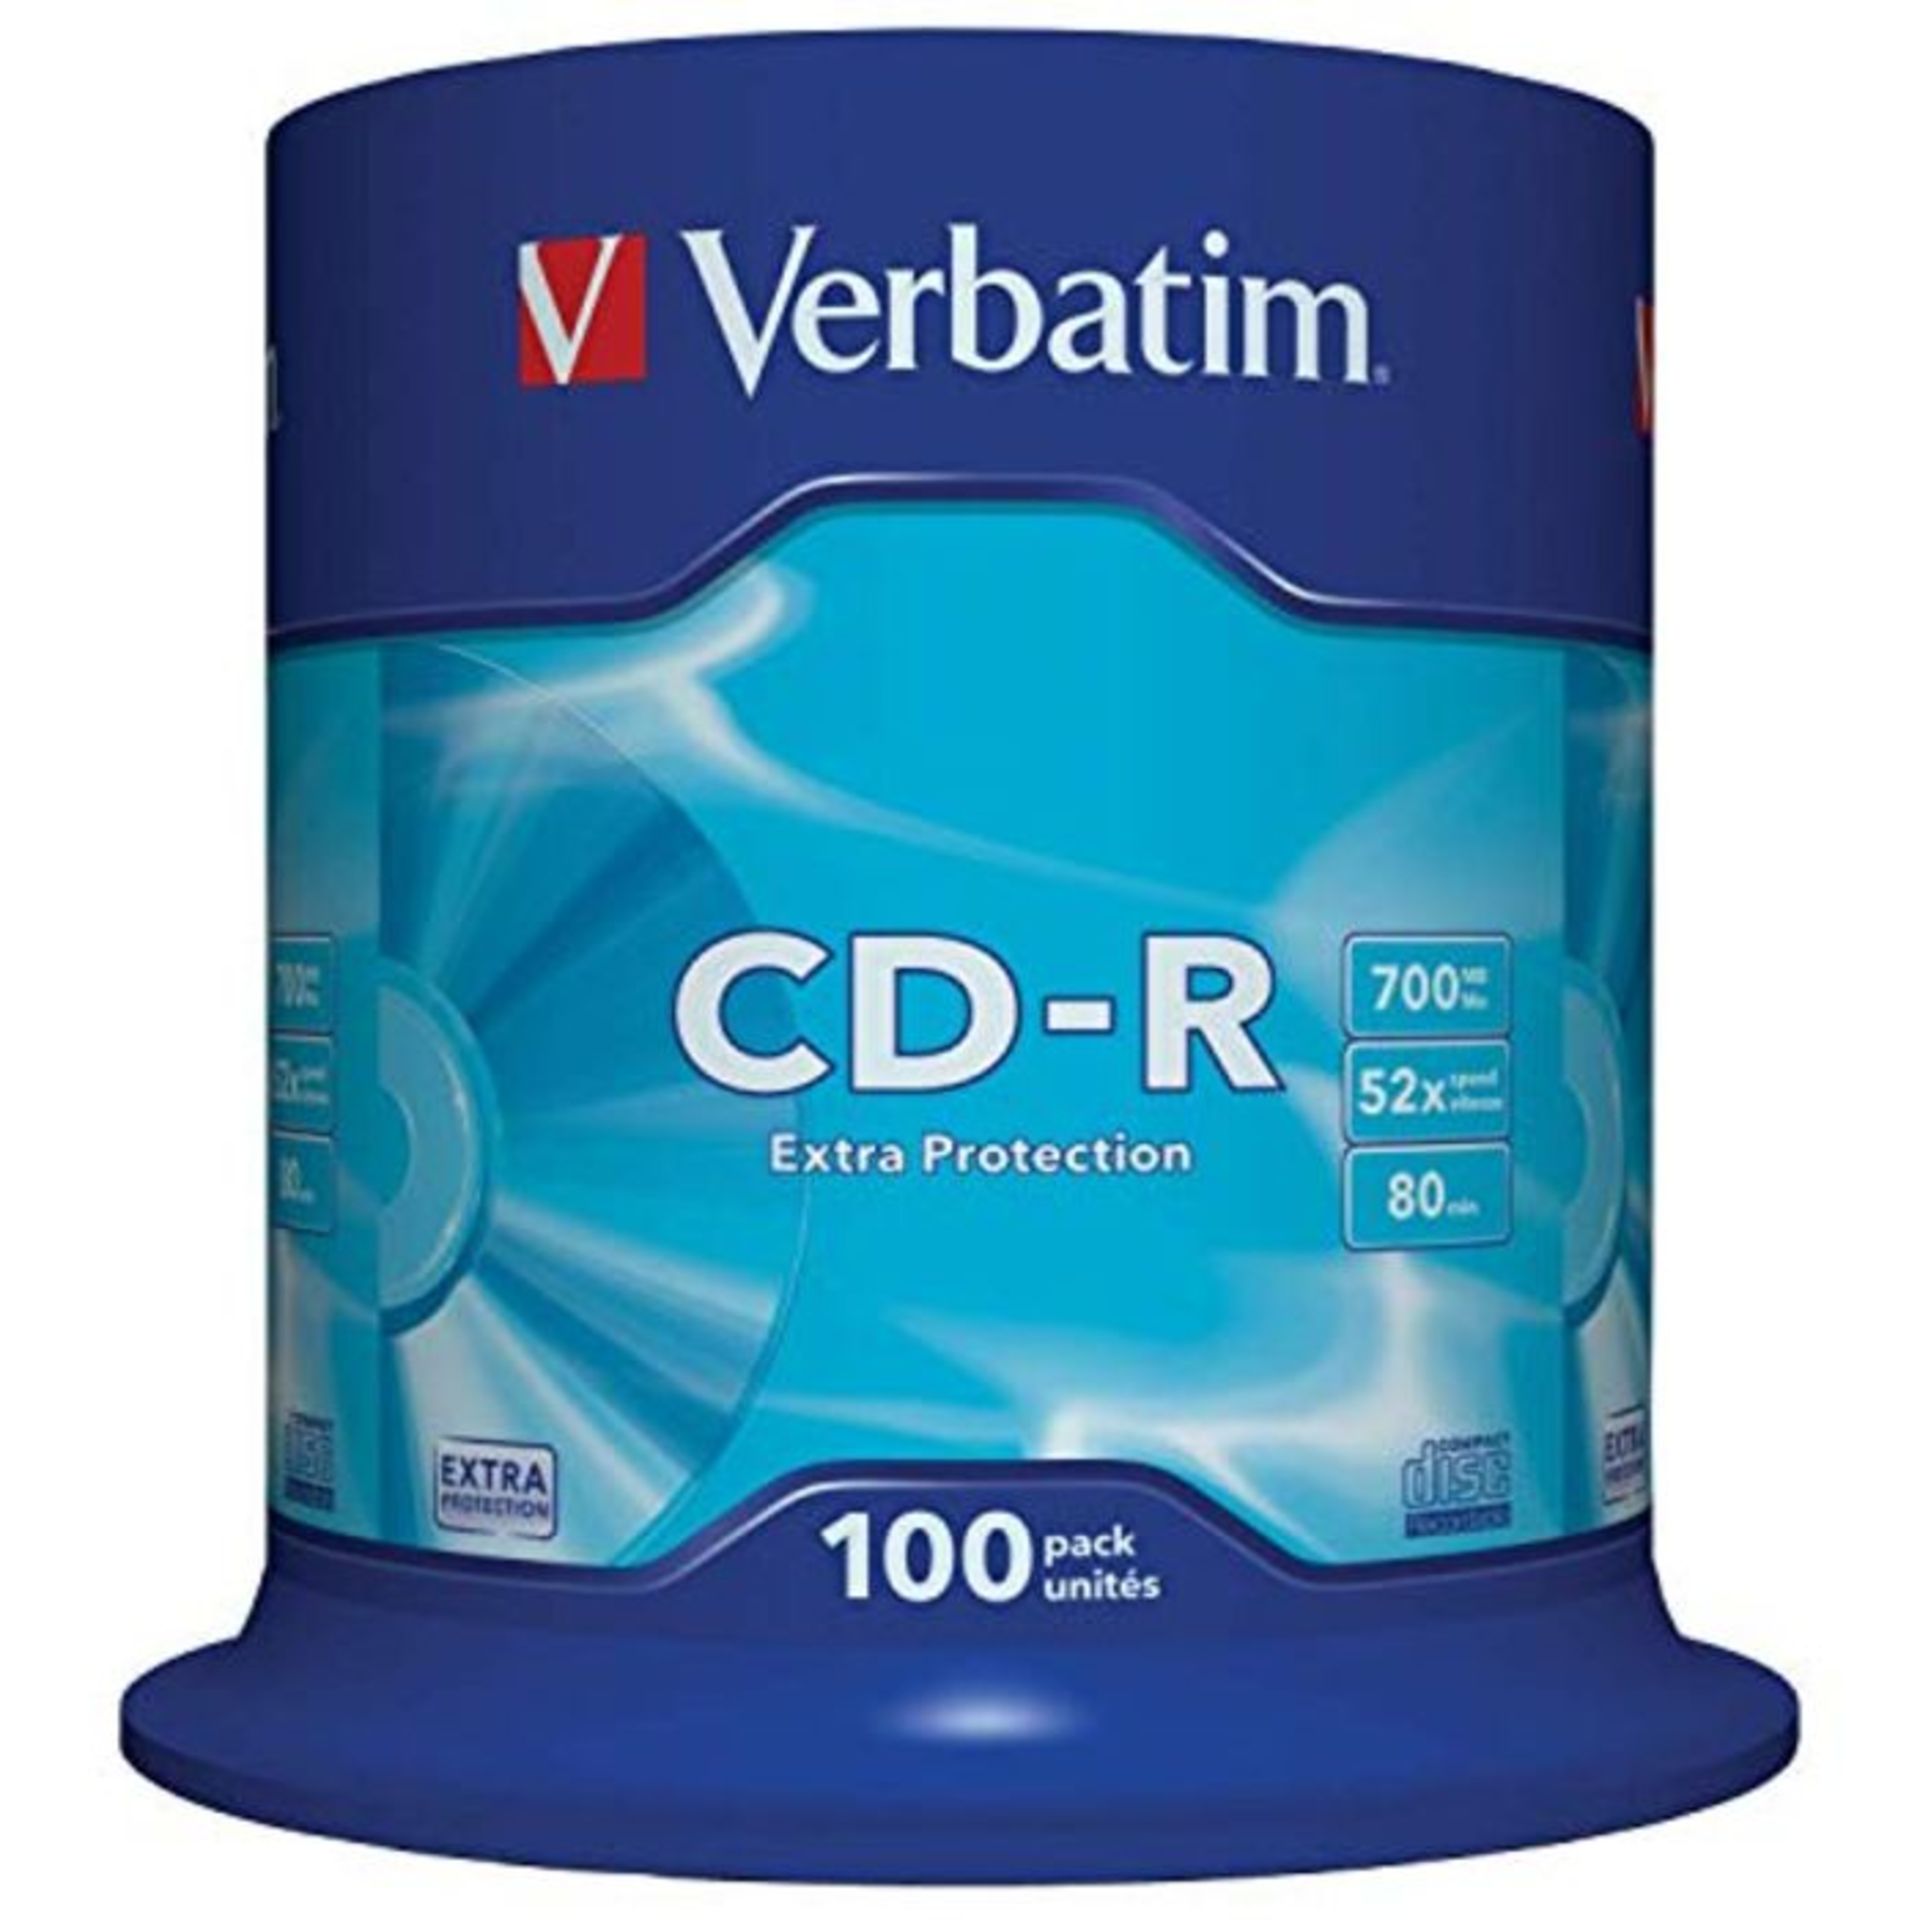 Verbatim 43411 700MB 52x Extra Protection CD-R - 100 Pack Spindle